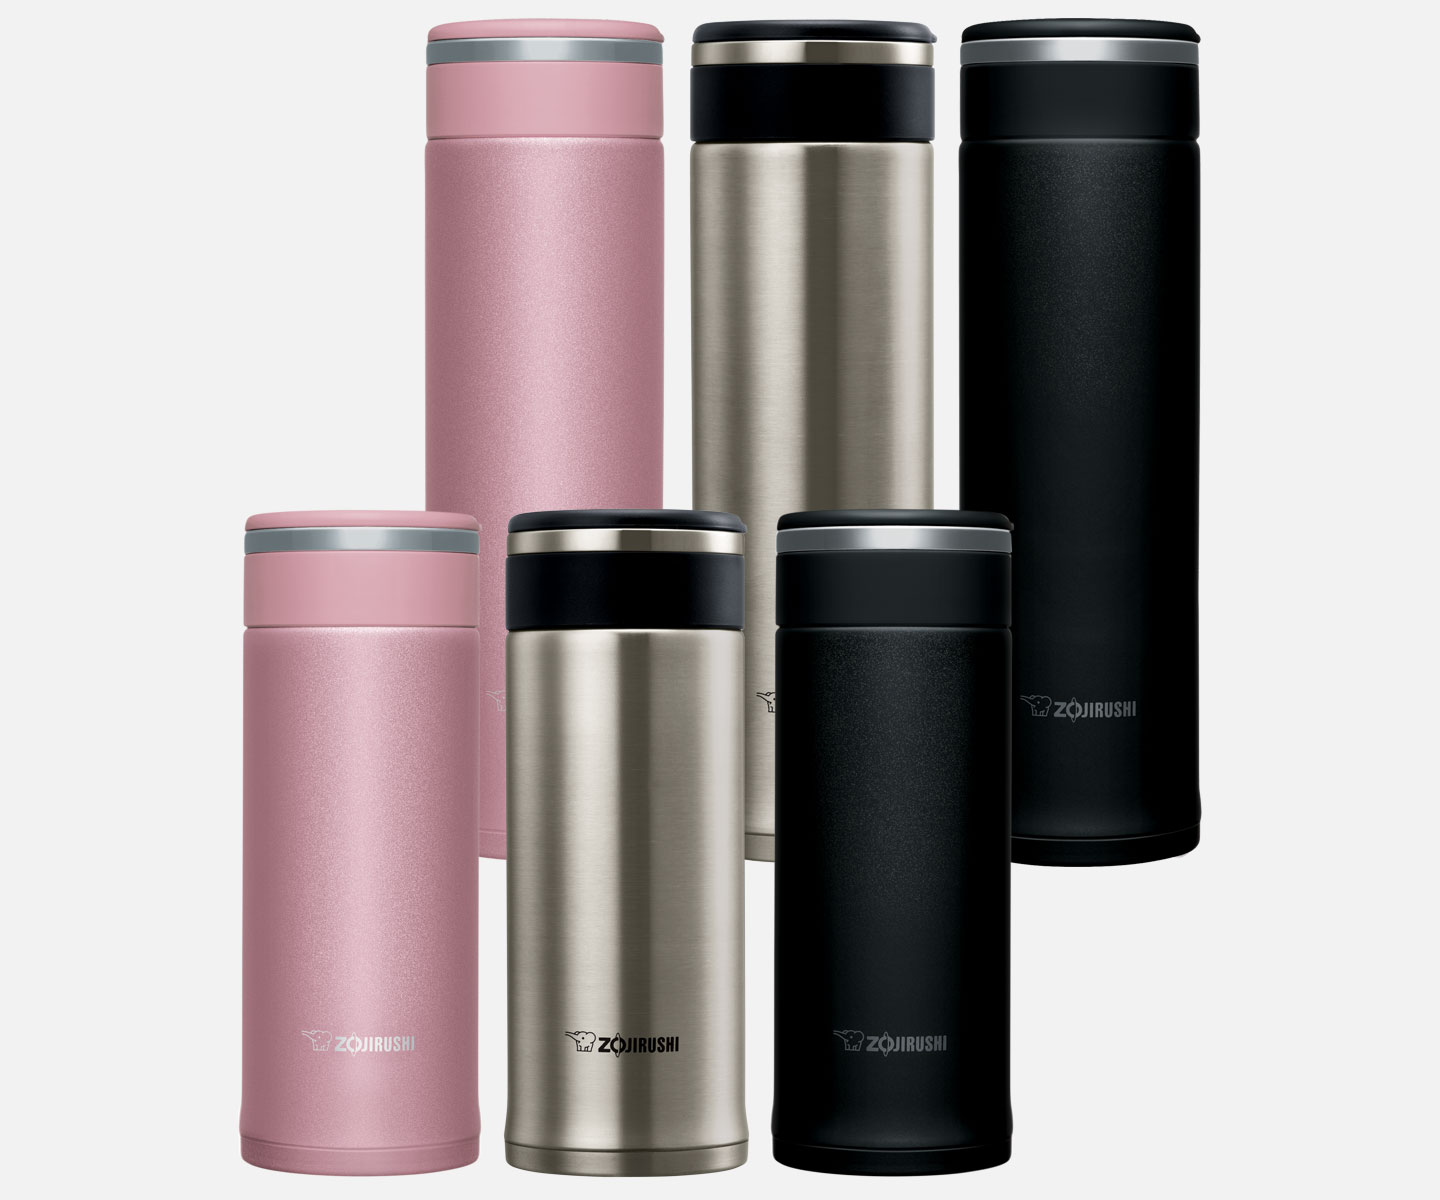 The Zojirushi Stainless Steel Mug Keeps My Drinks Hot for Hours - Eater